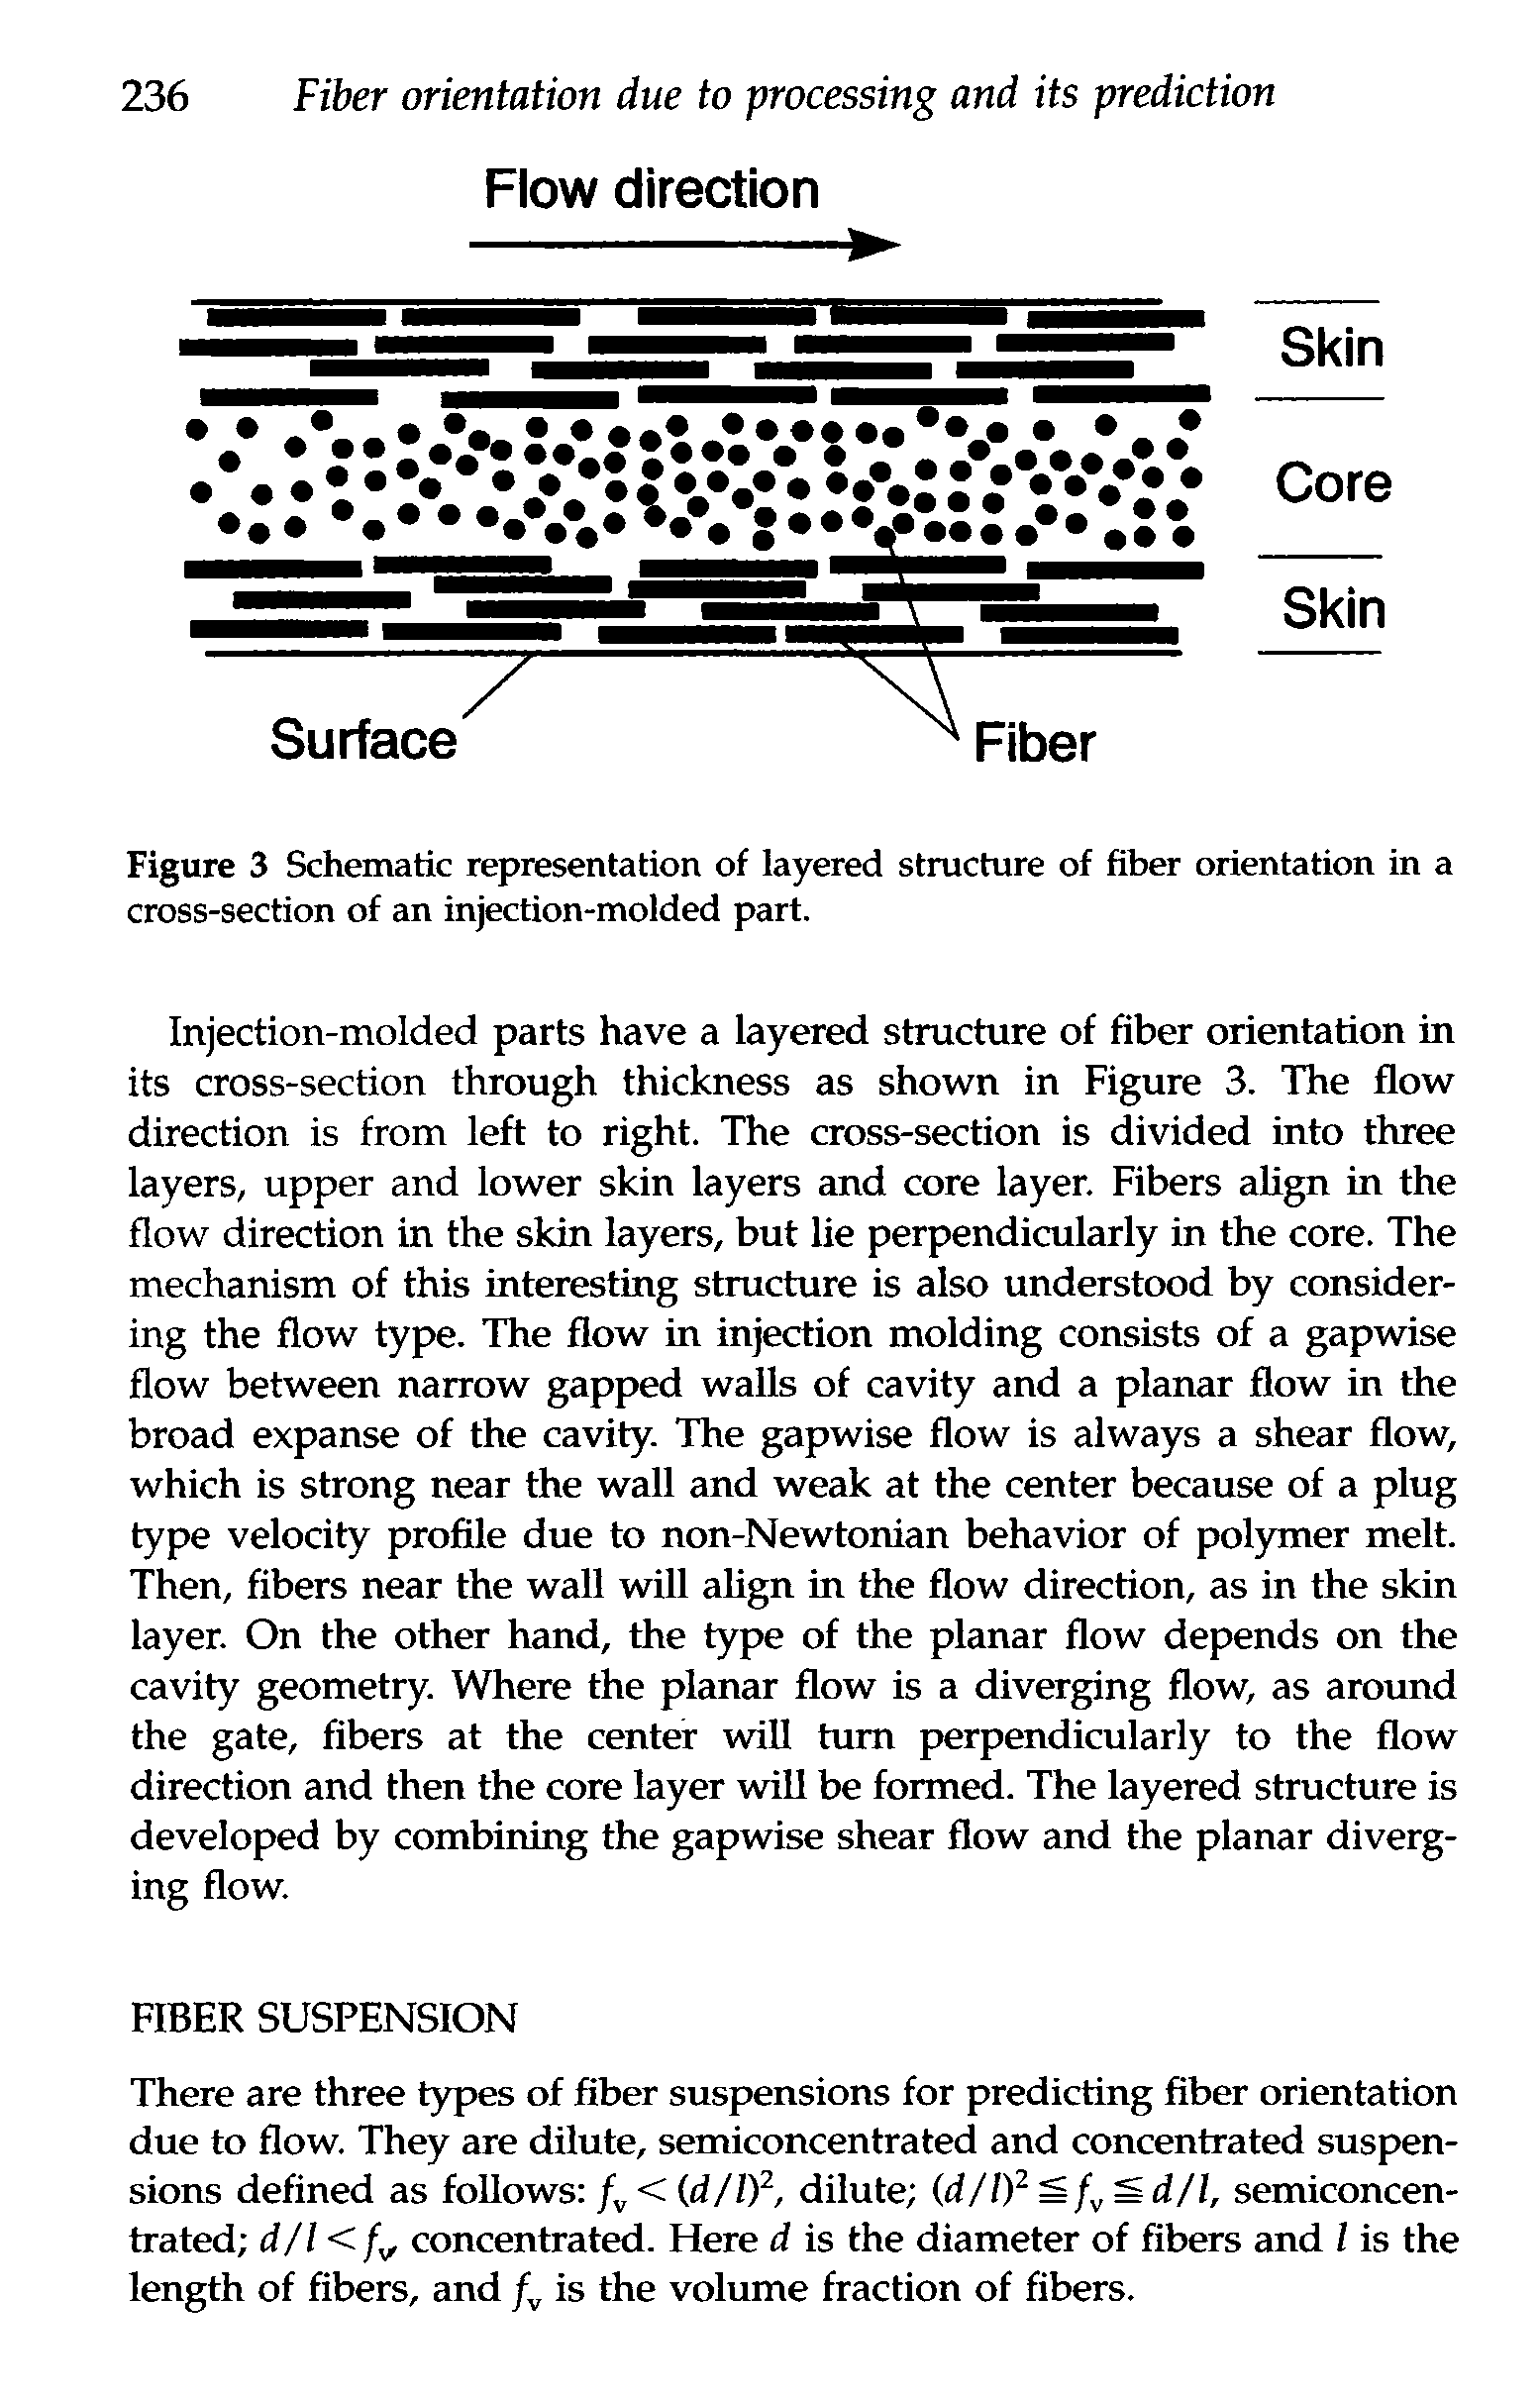 Figure 3 Schematic representation of layered structure of fiber orientation in a cross-section of an injection-molded part.